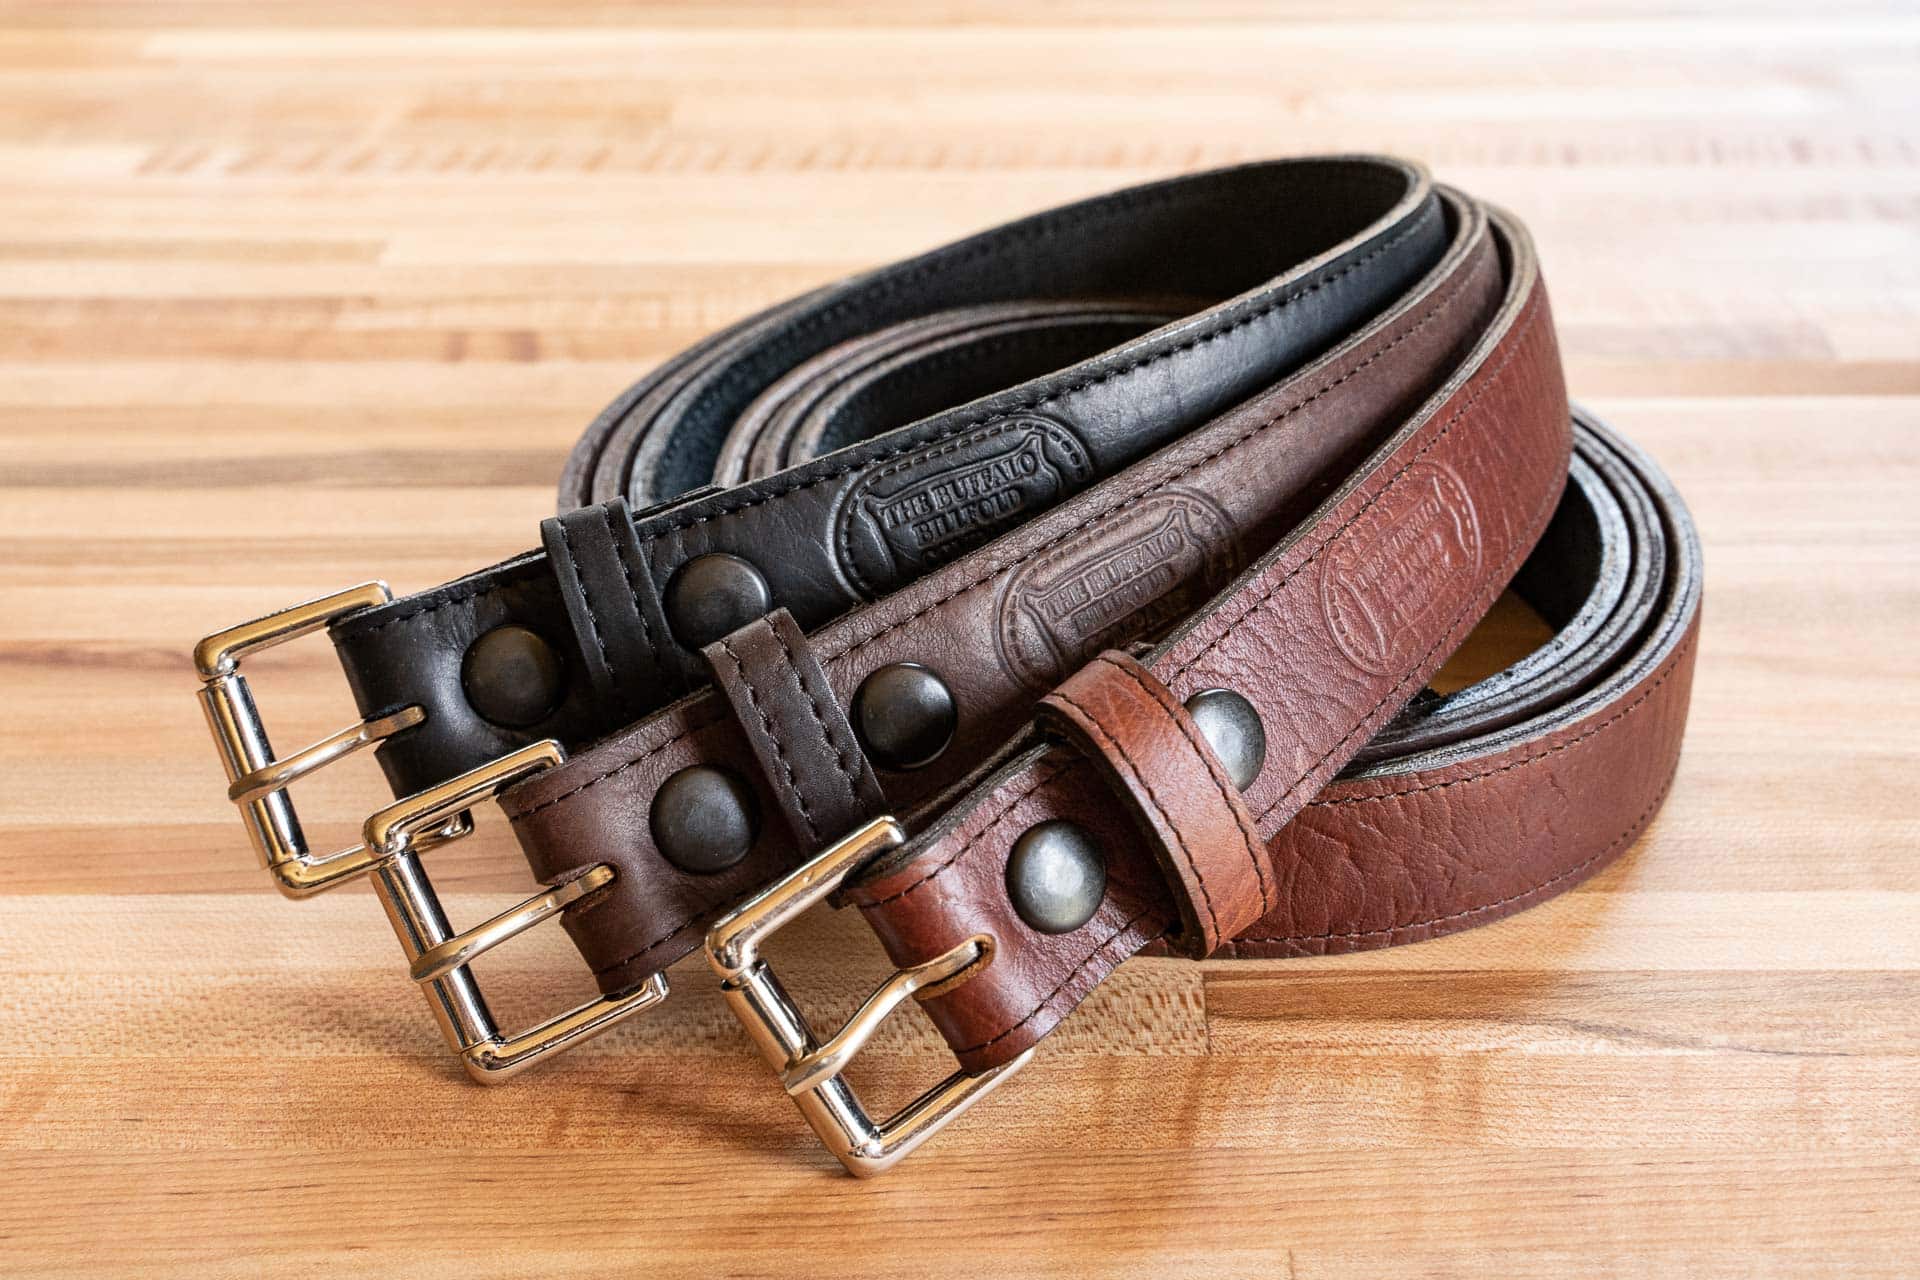 Mens Leather Belt Belts Jeans Trousers Genuine Black Tan Brown Buckle New Sizes